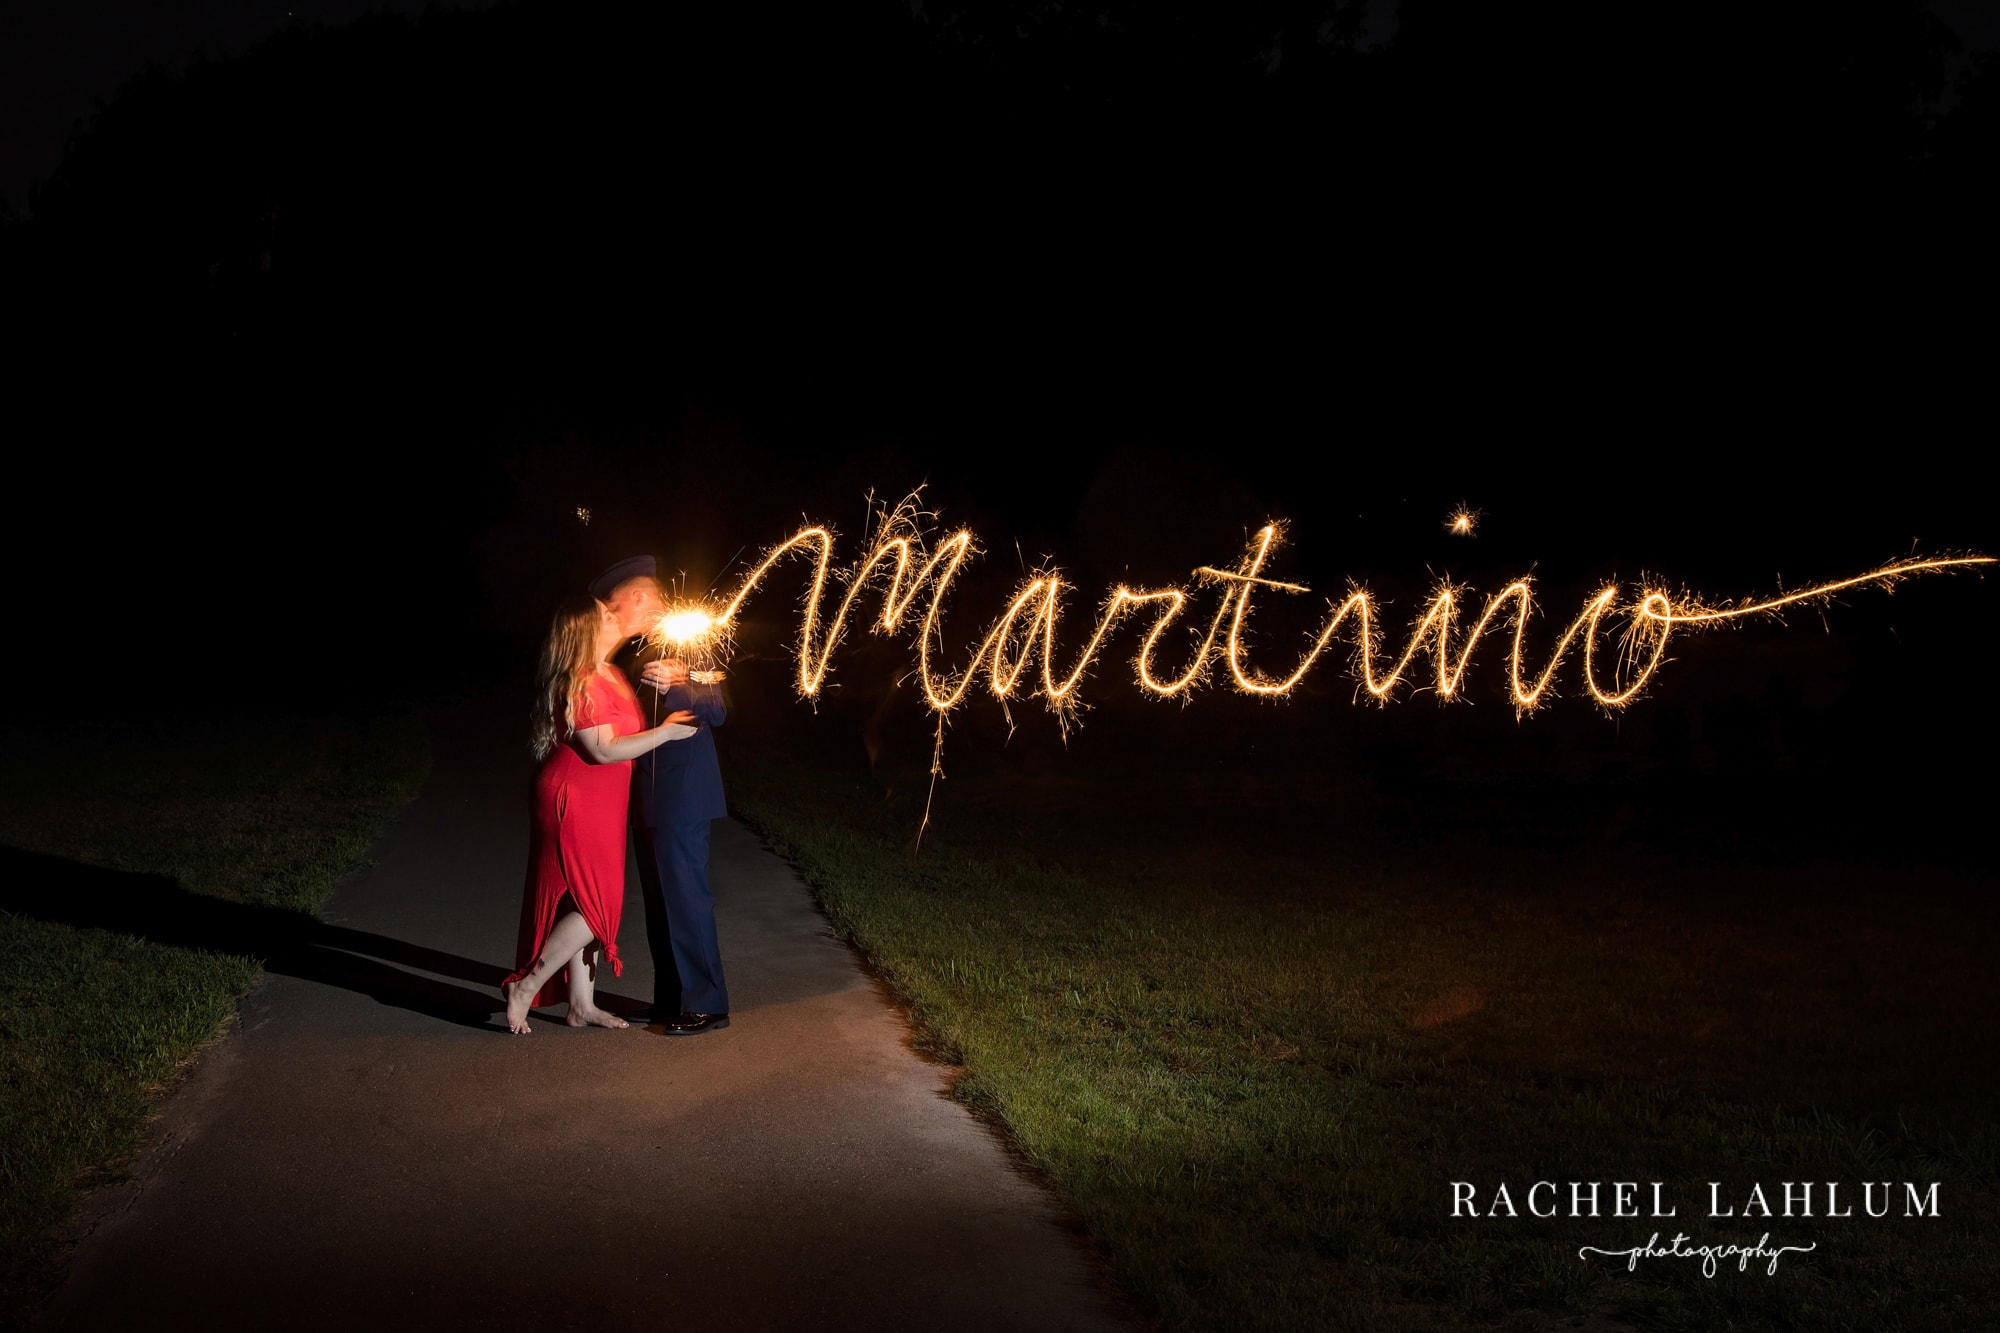 Light painting a newlywed couple's last name with sparklers.  